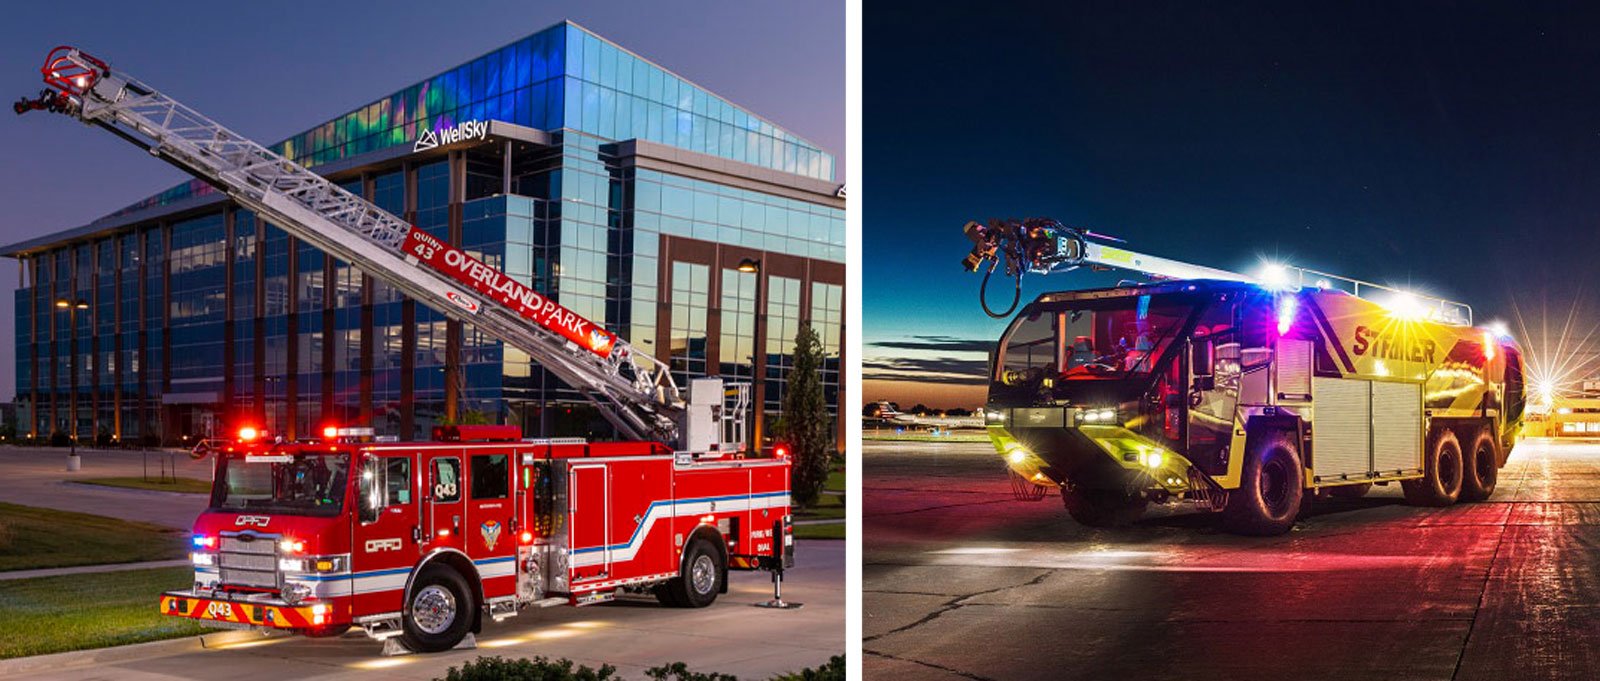 A side-by-side photo of night scenes shows a red municipal fire truck with an extended aerial device and an ARFF vehicle parked at an airport, both with scene lighting. 